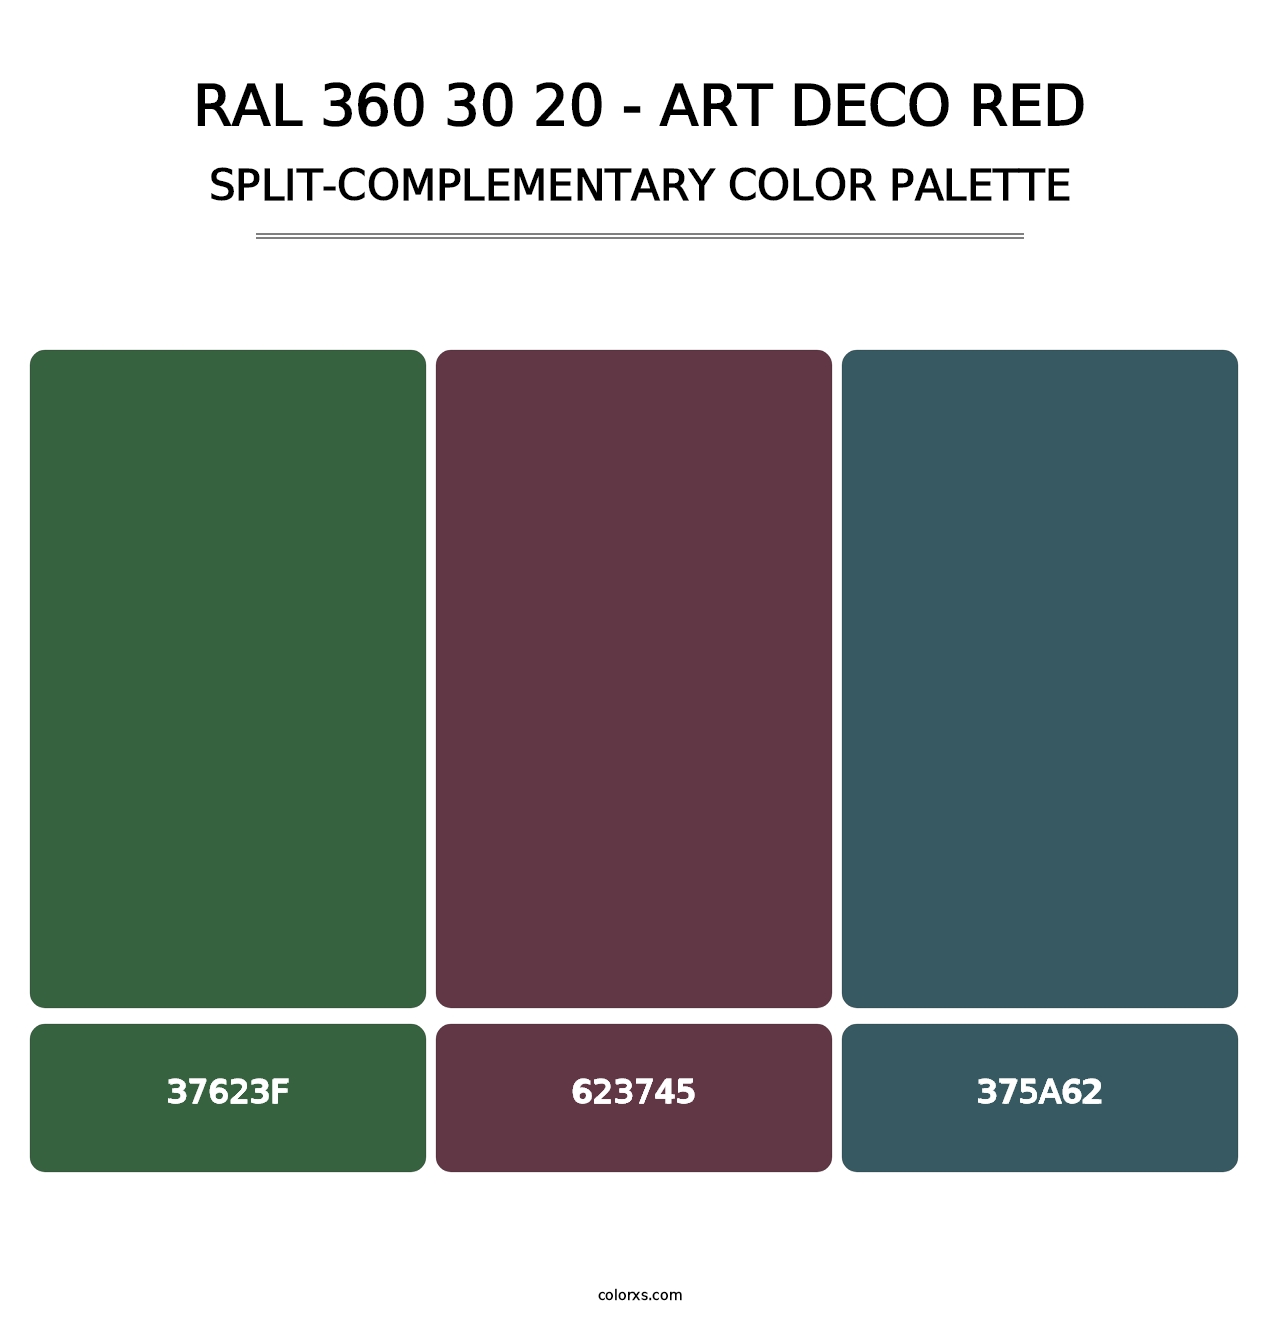 RAL 360 30 20 - Art Deco Red - Split-Complementary Color Palette